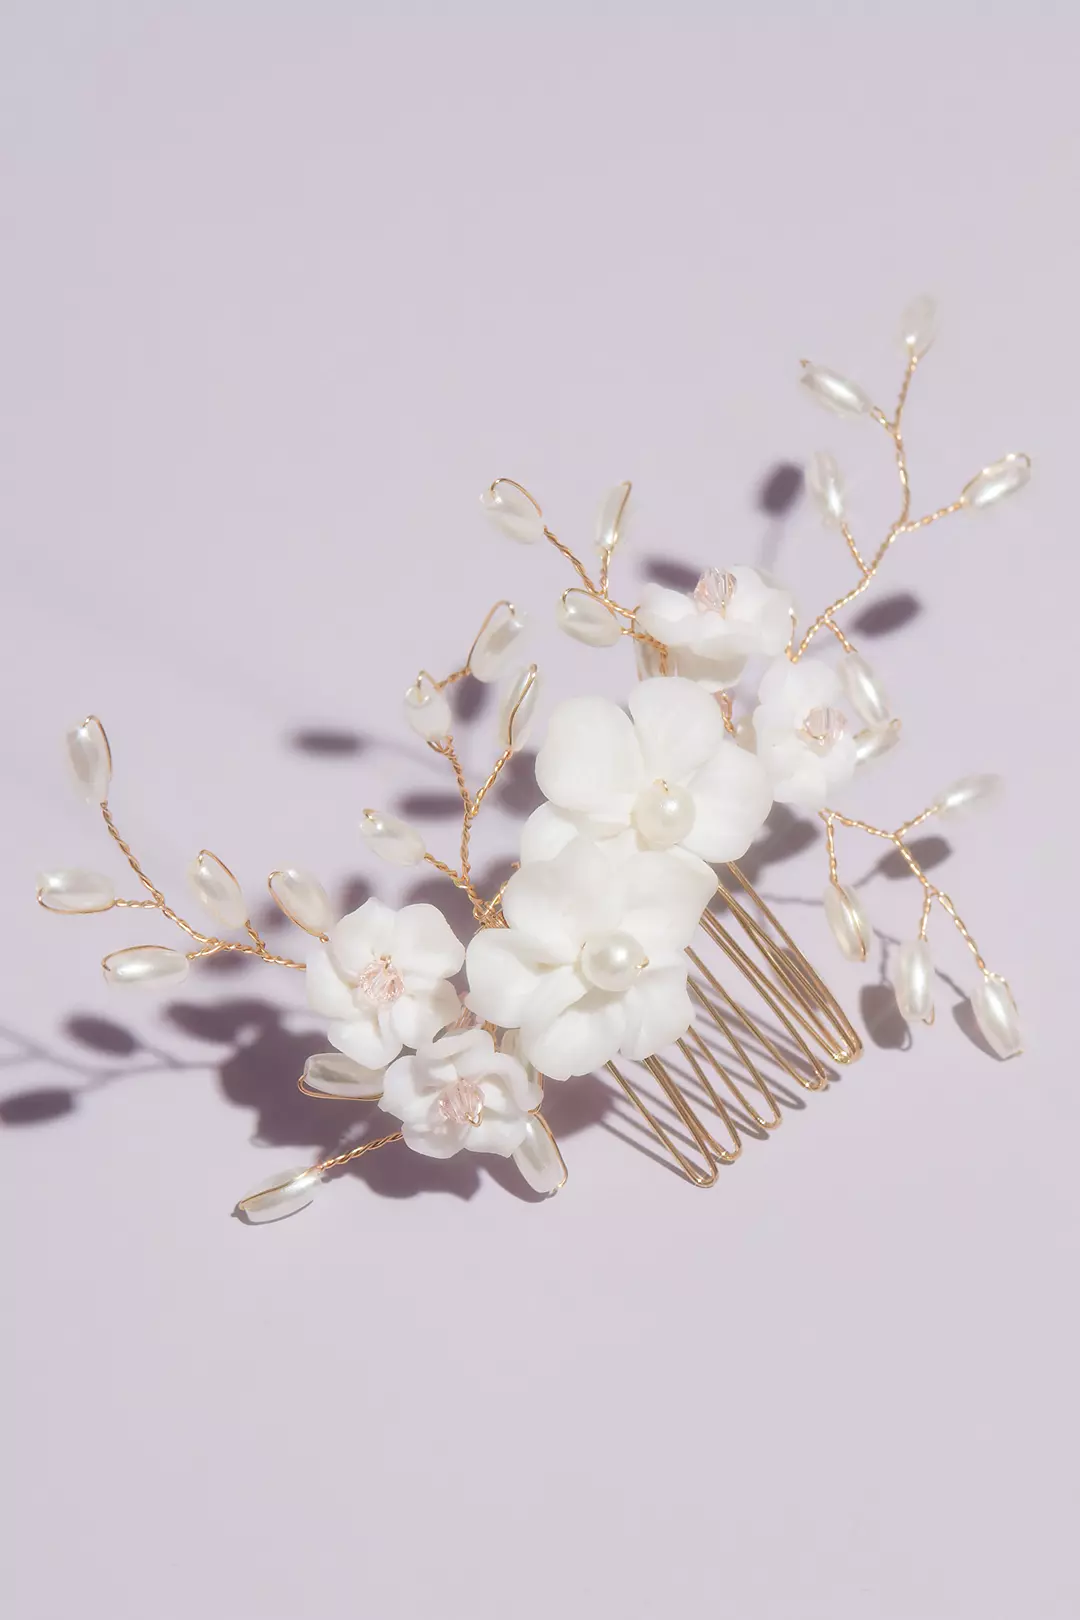 Floral Hair Comb with Wire Twist Beads and Pearls Image